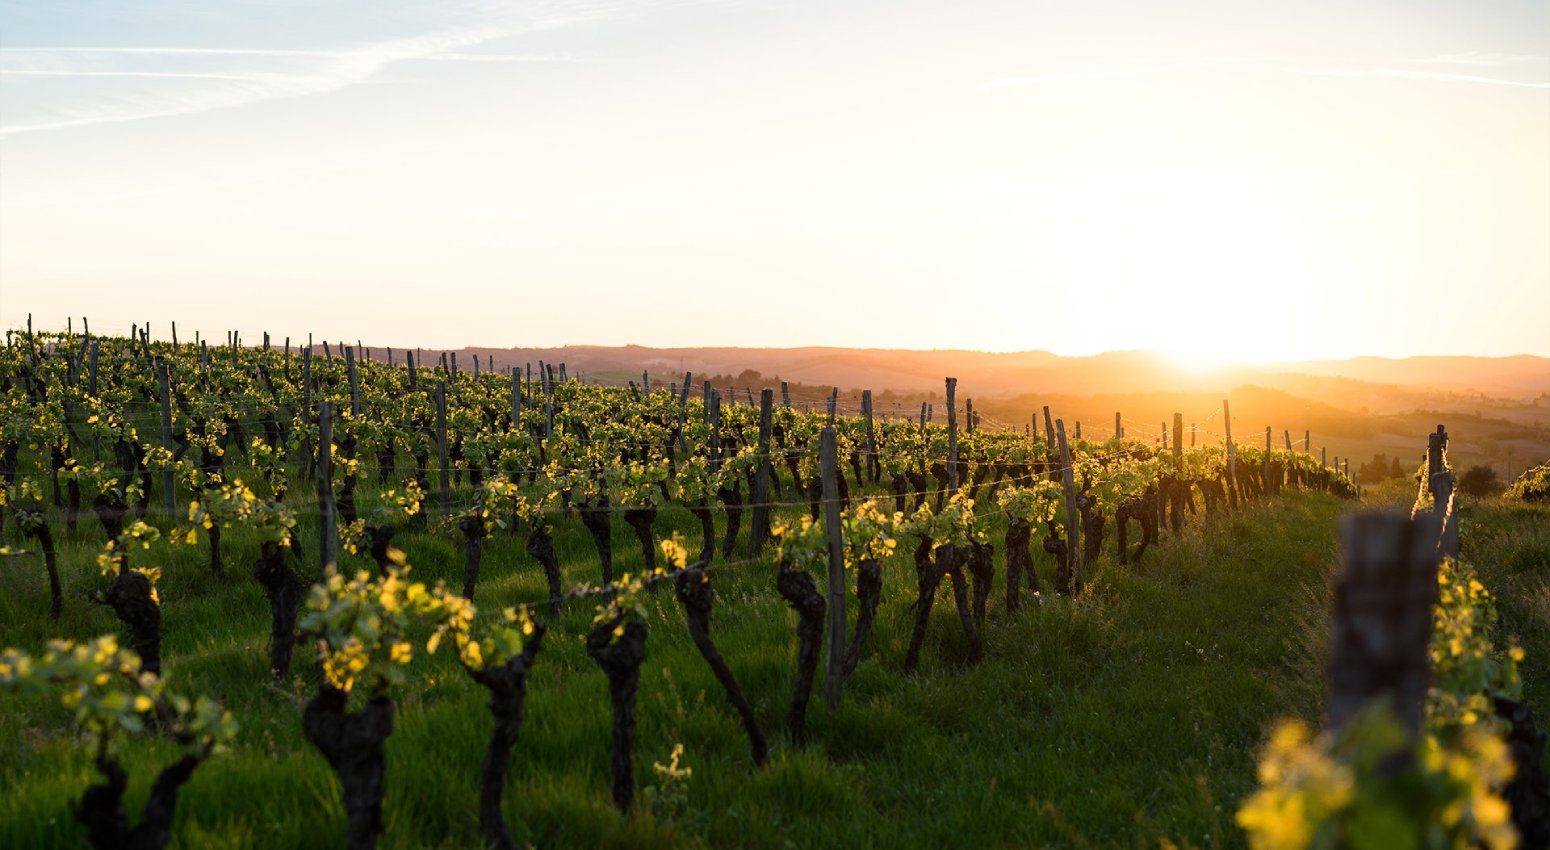 Close-up of a vineyard during sunset